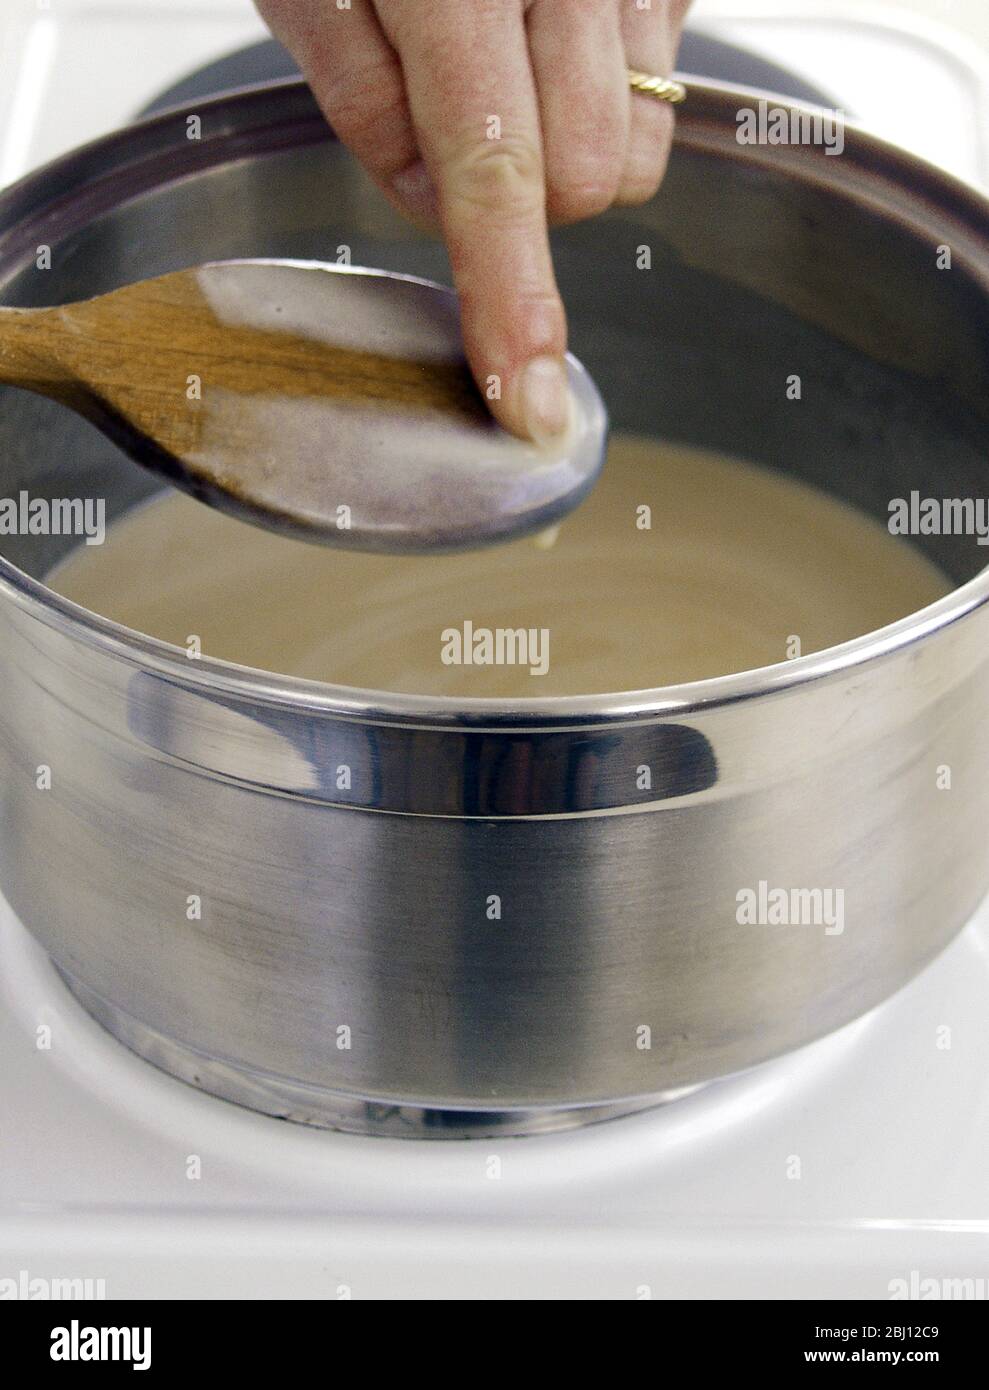 Making custard and checking how far it has thickened - Stock Photo